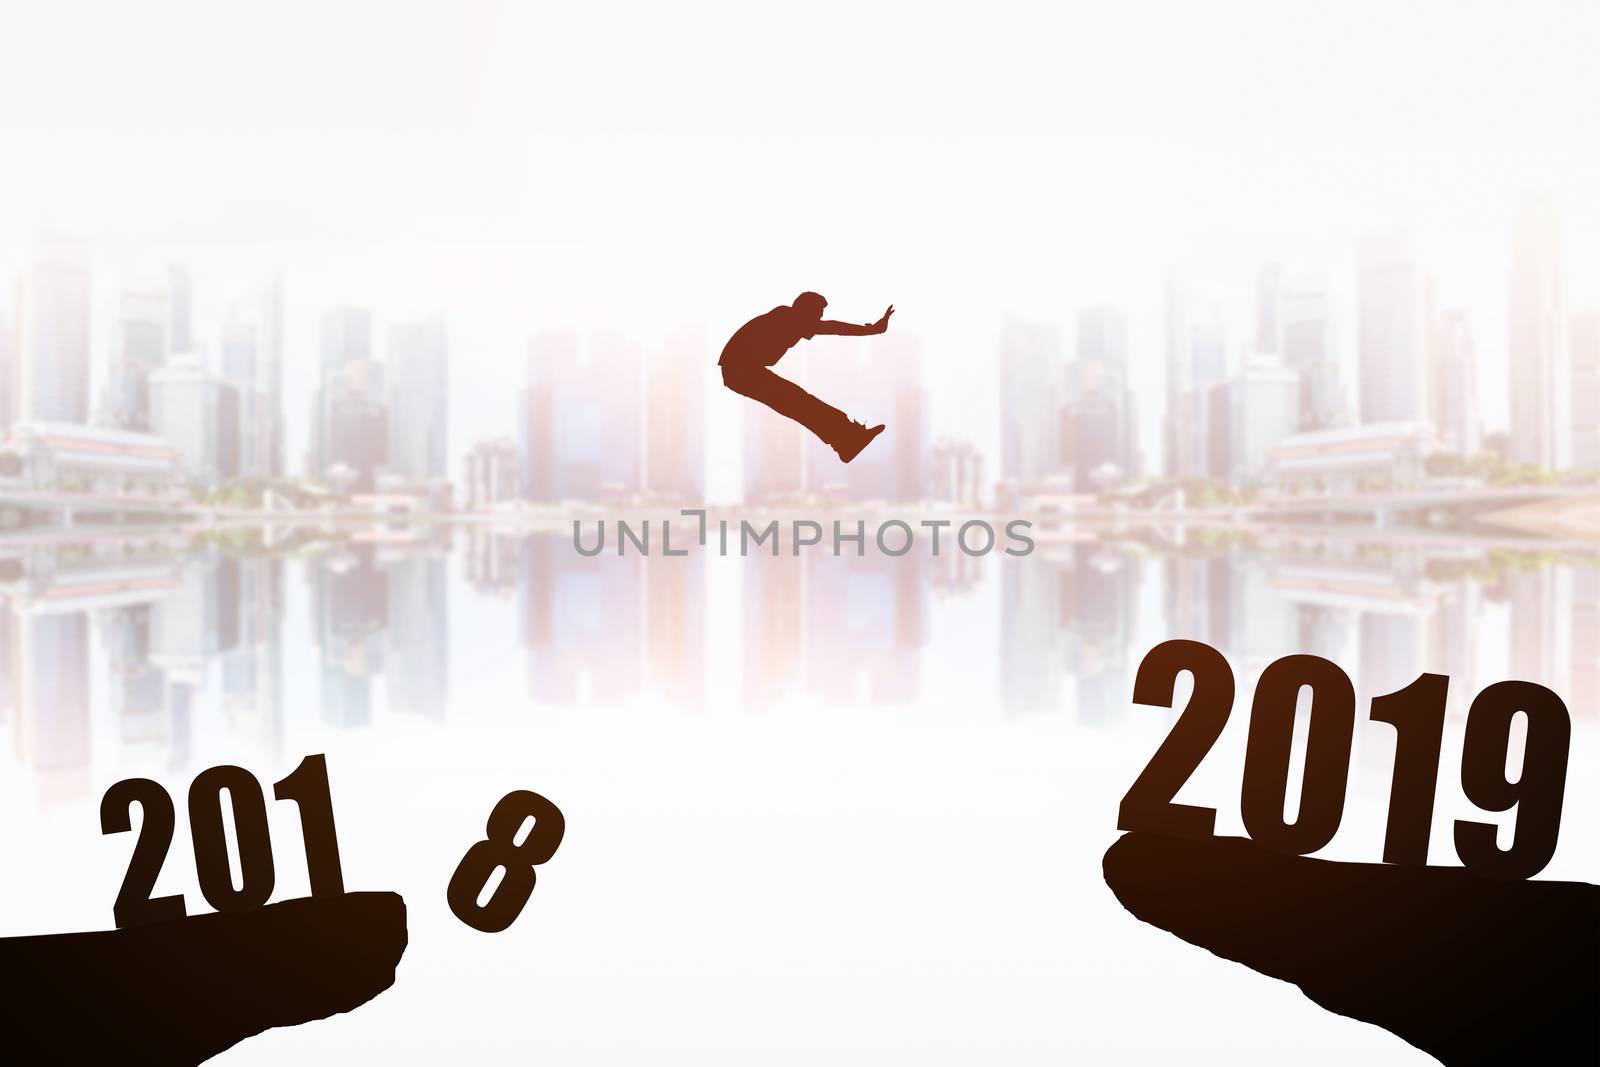 Silhouette of young man jumping between 2018 and 2019 years with beautiful the skyscrapers background, concepts of news year and business target.